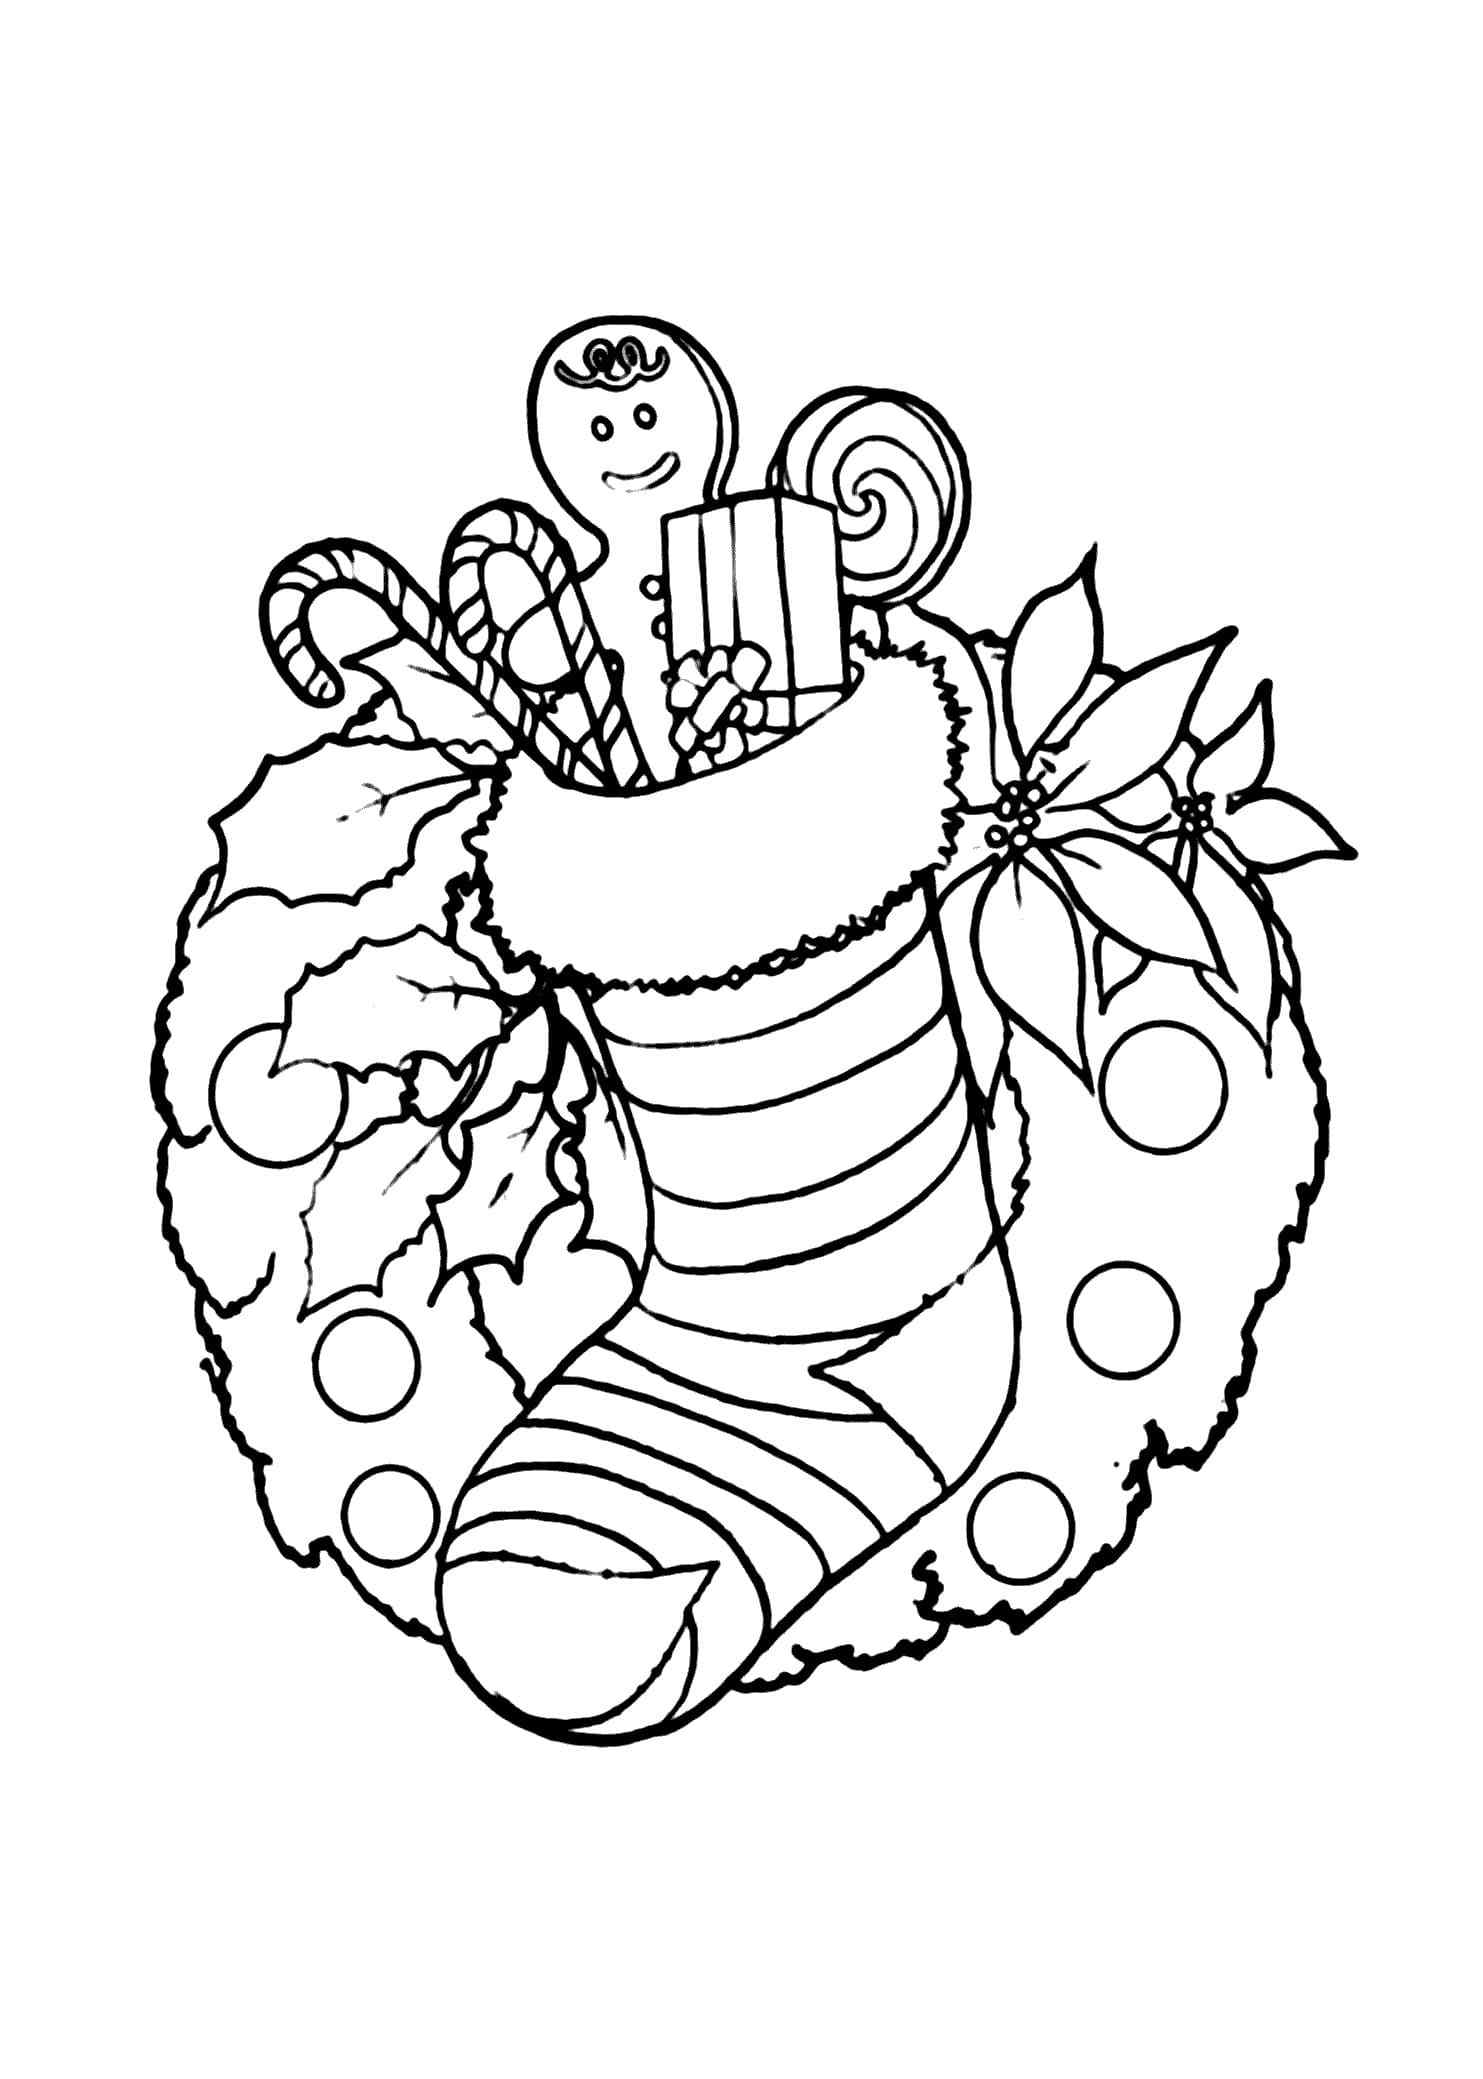 Joyful Attributes Of Christmas Coloring Page